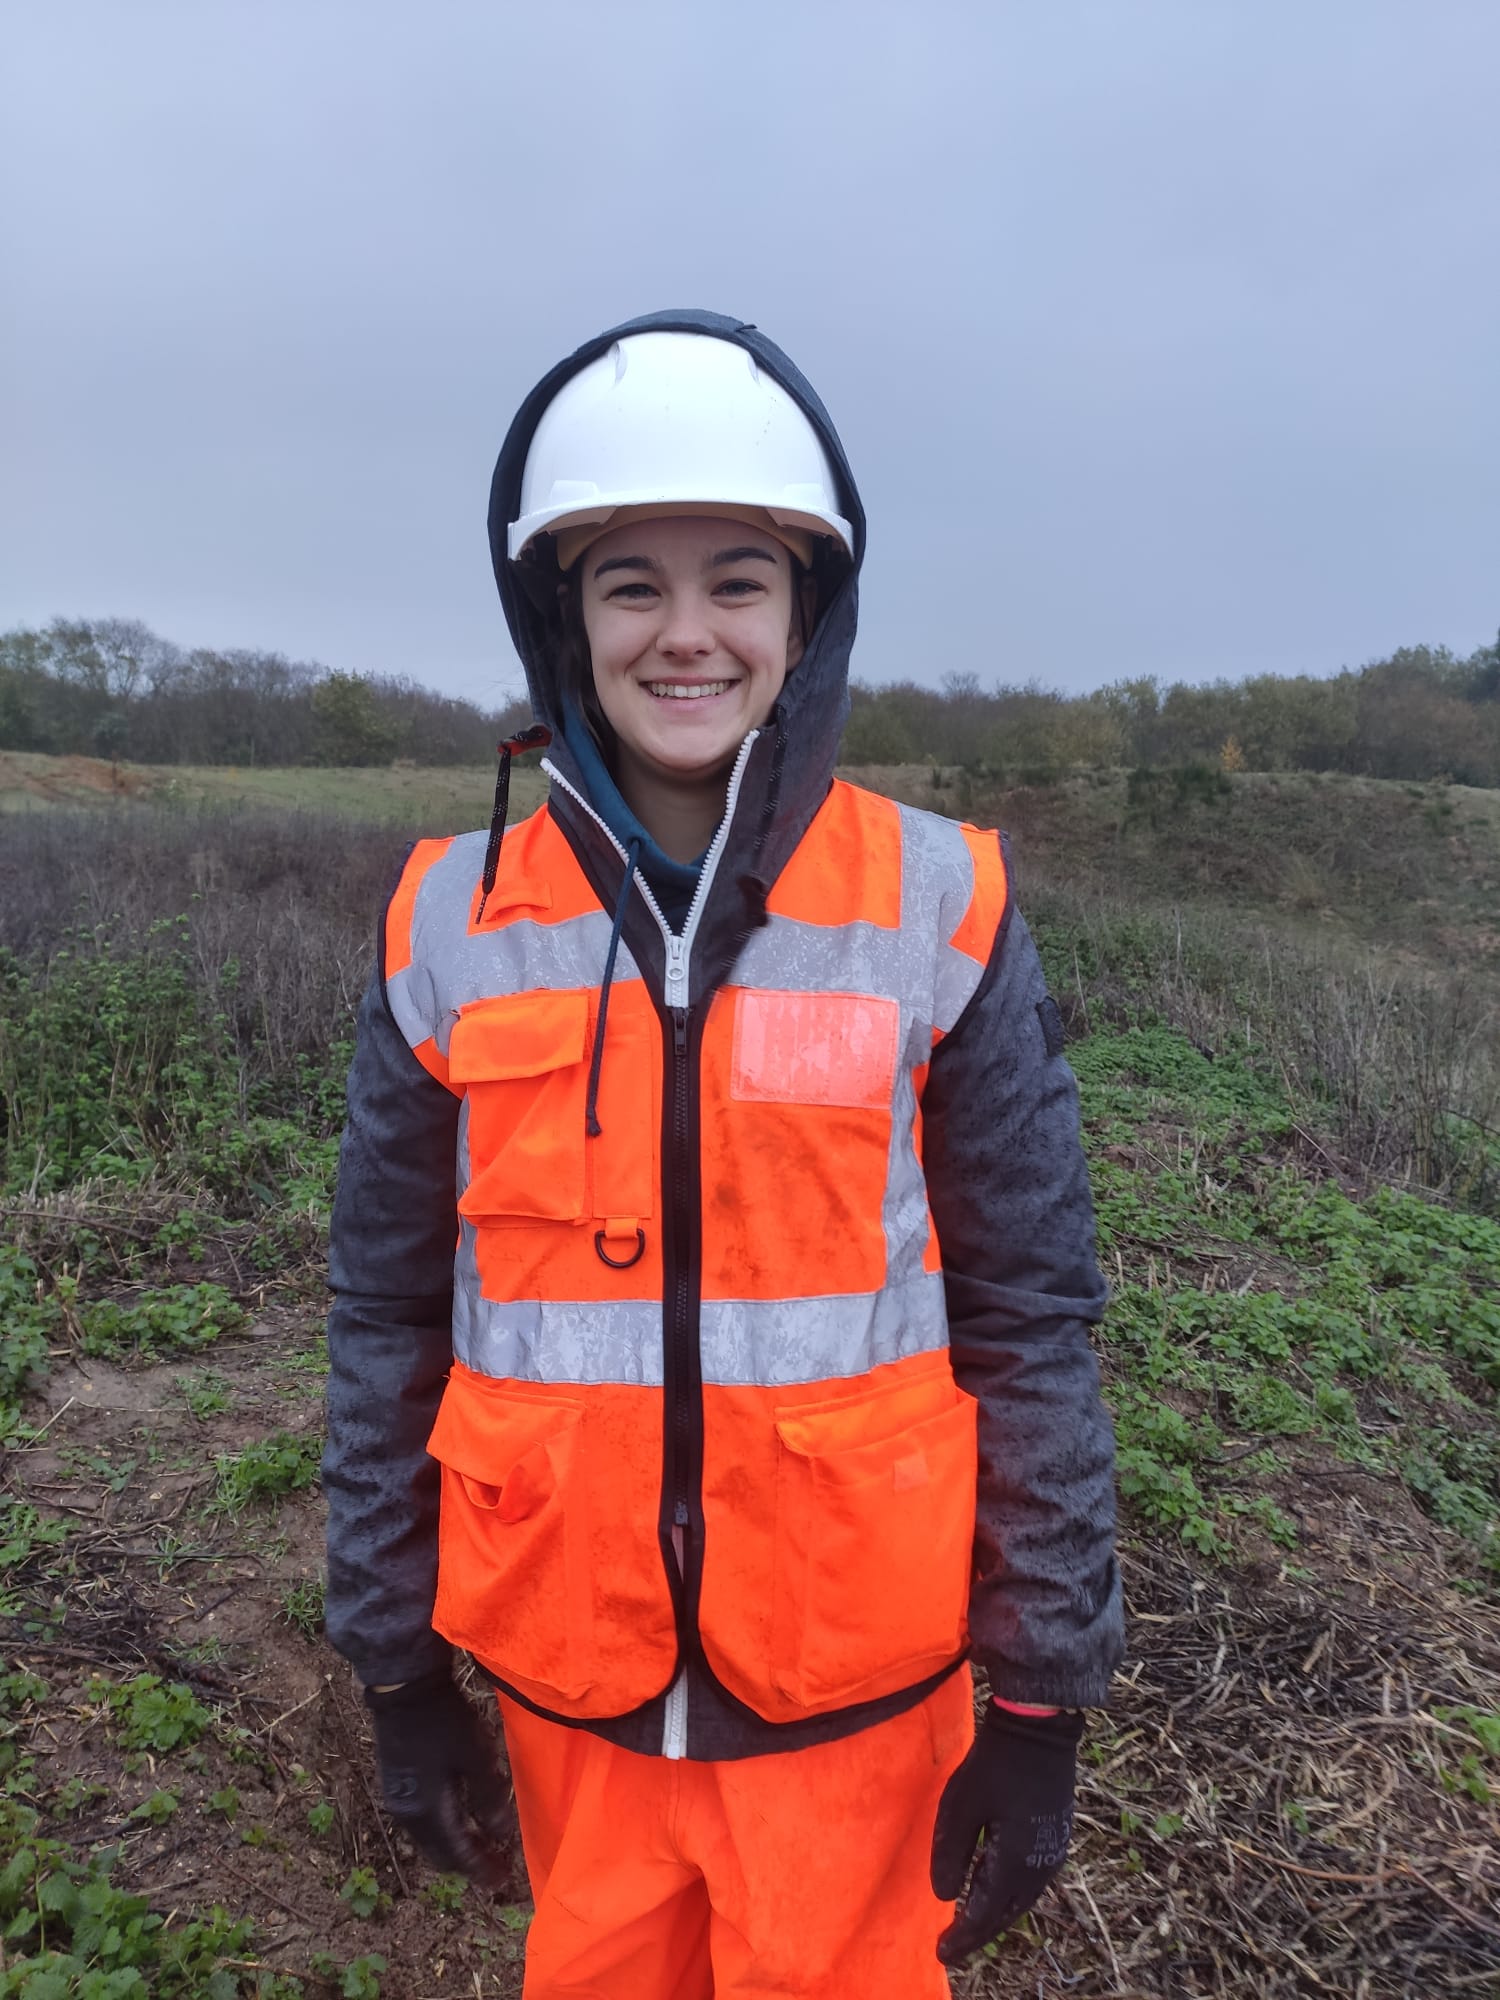 A Bioscan (UK) Ltd employee, Emily Day, stands facing the camera in full high-visibility protective gear.